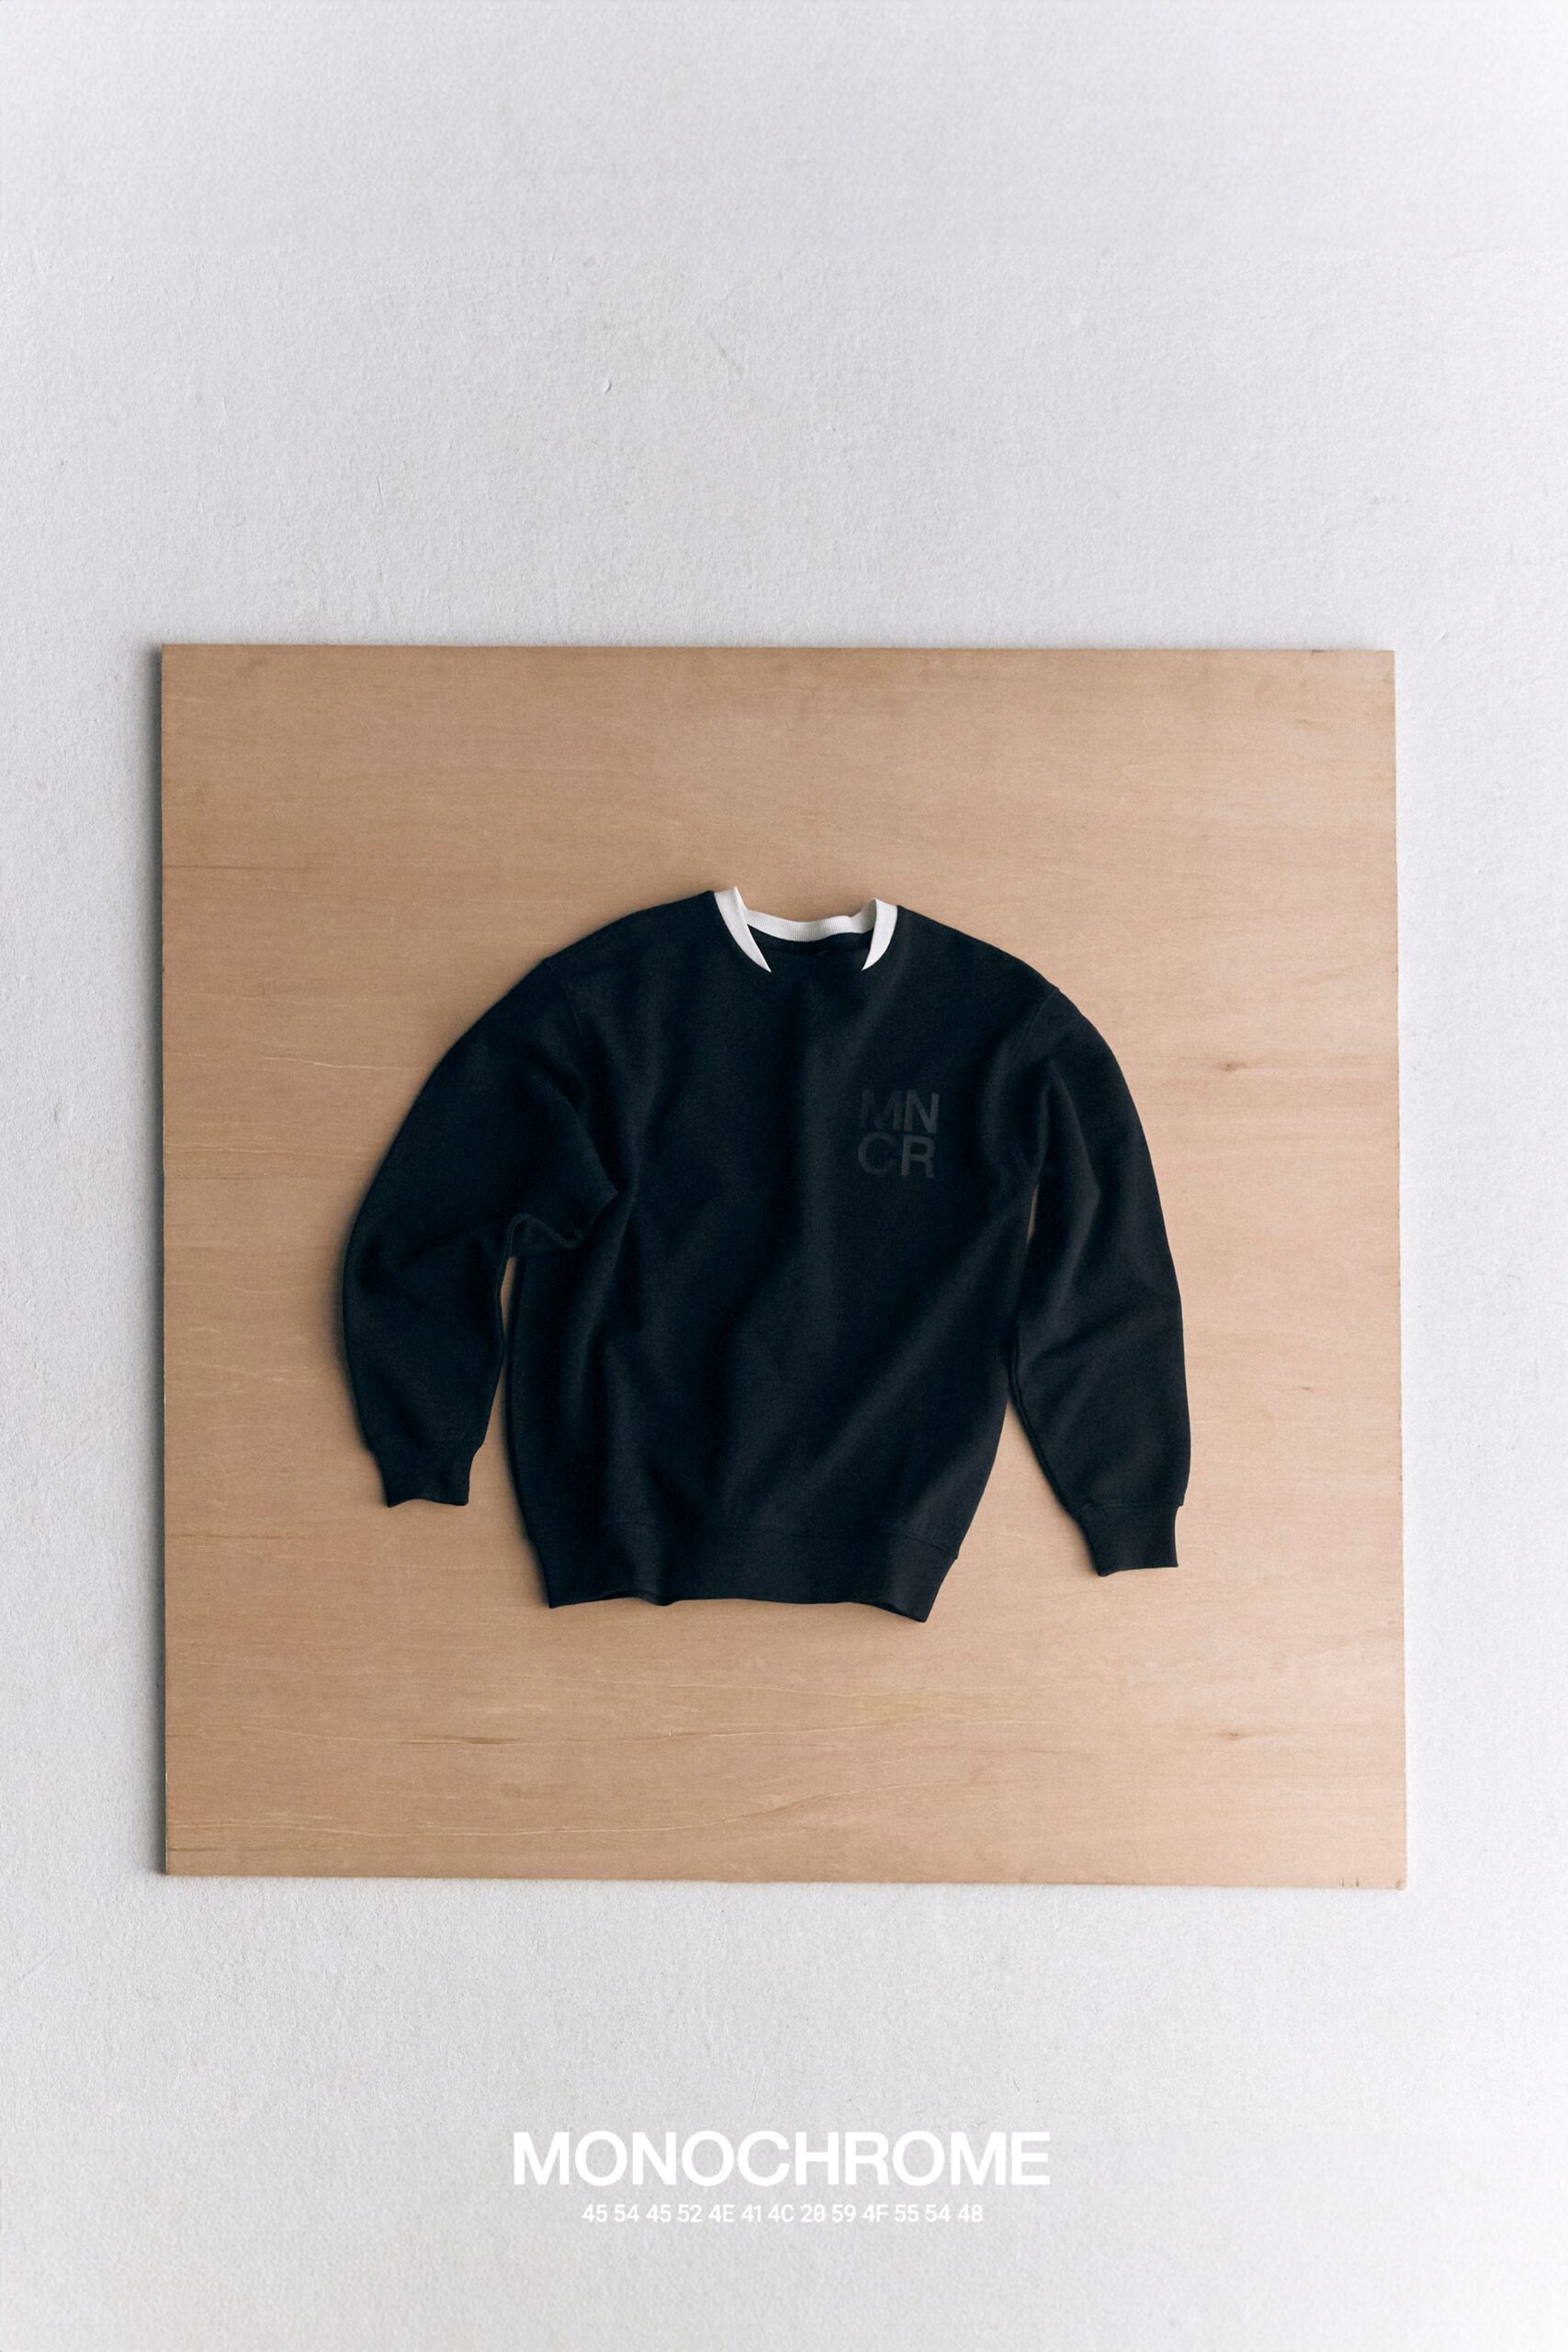 Sweater from BTS' Monochrome pop-up store